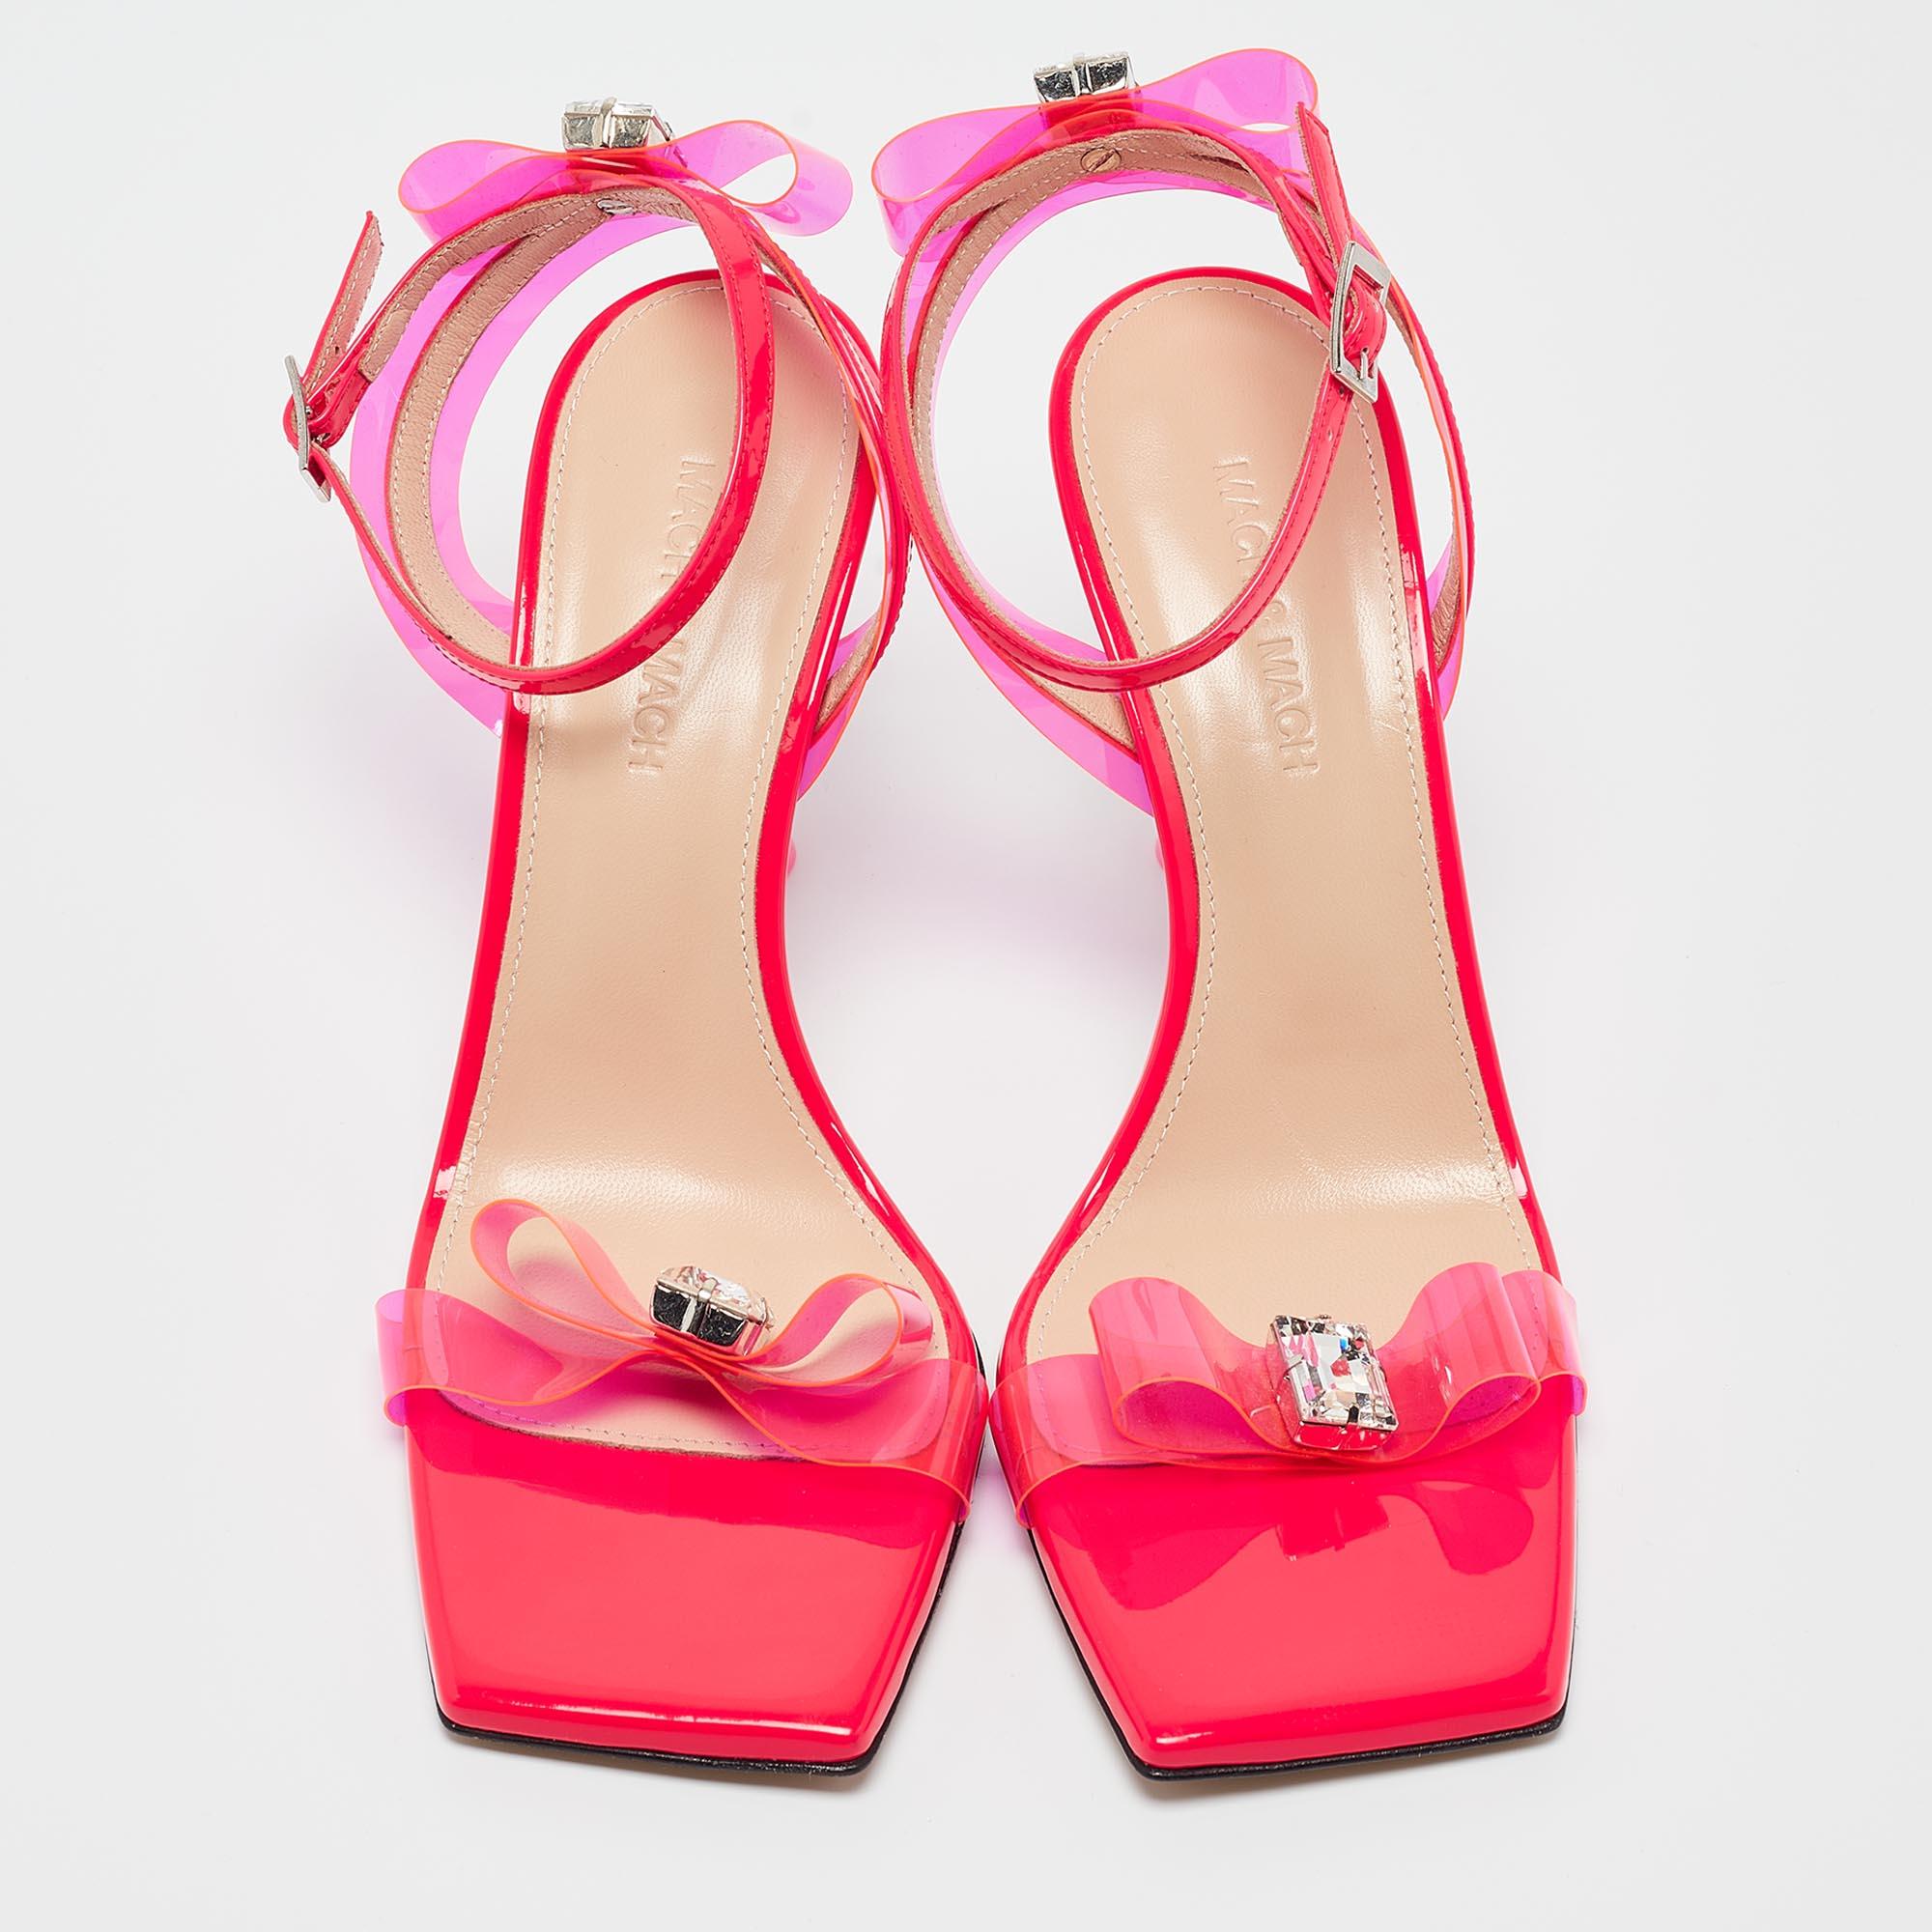 Slip into the epitome of playful luxury with Mach & Mach's sandals. Crafted with meticulous attention to detail, these sandals feature a charming French bow accent, blending the allure of patent leather with the whimsical appeal of translucent PVC